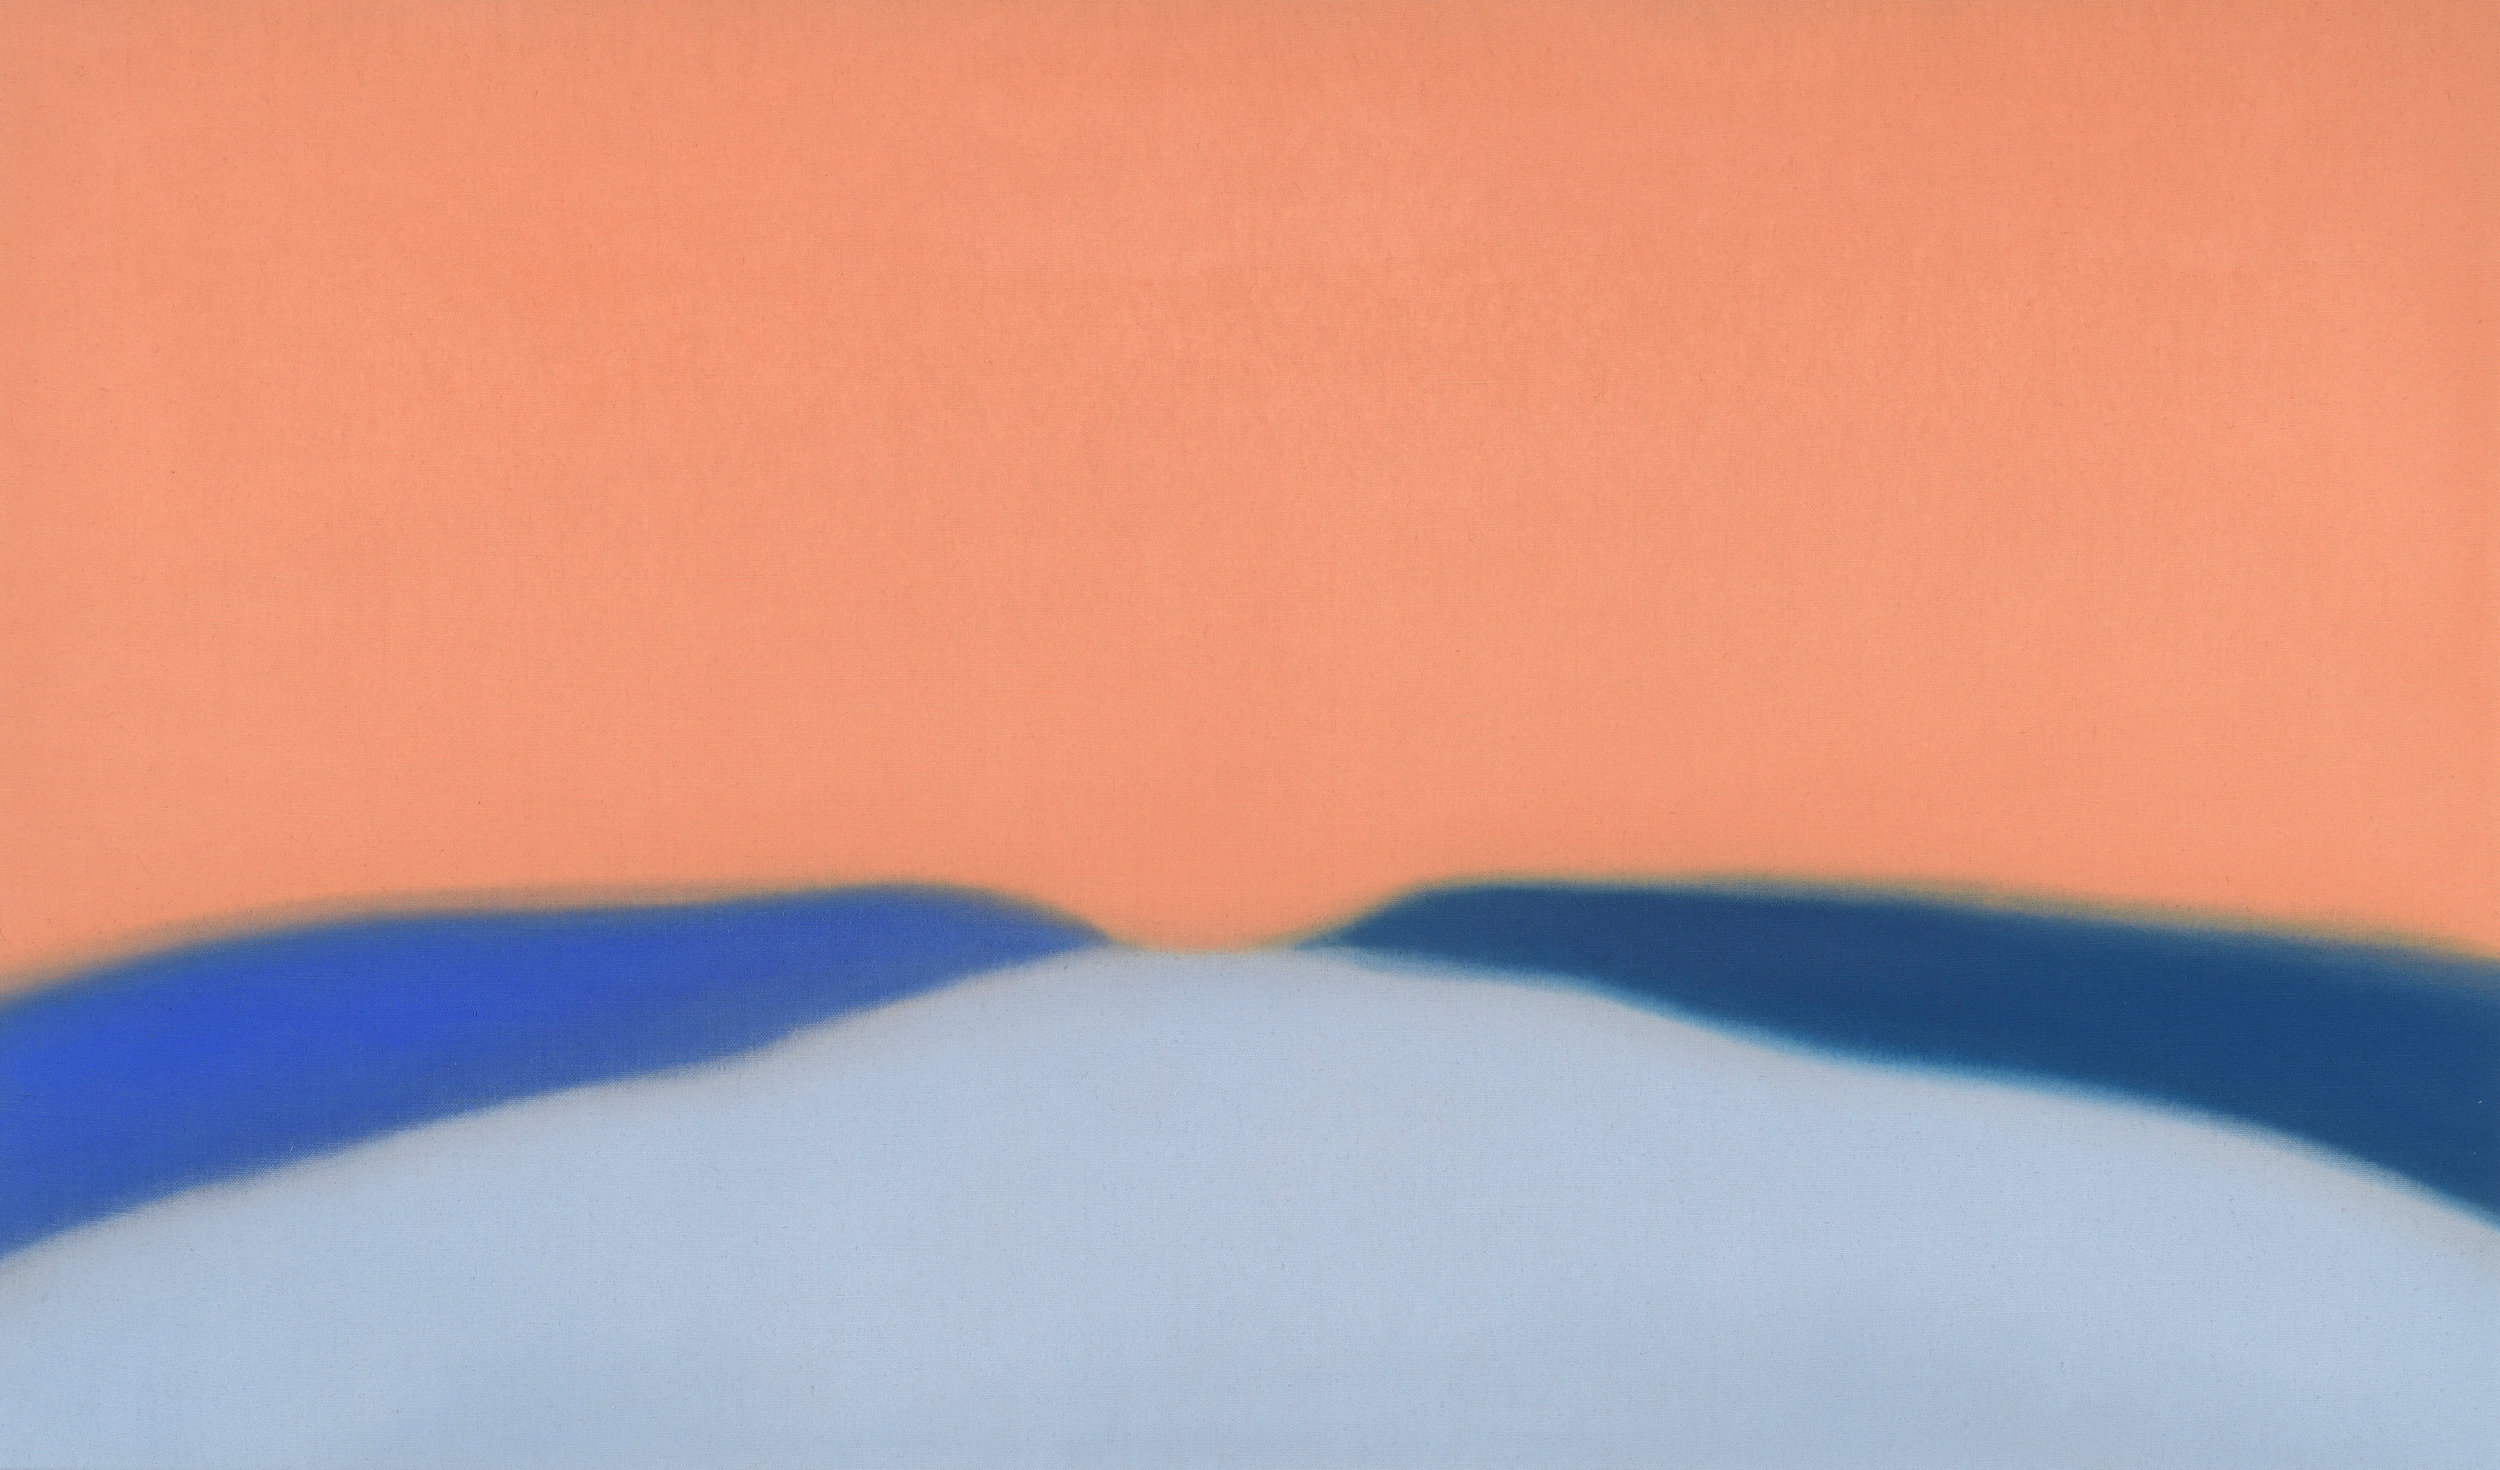  Untitled (Hot Orange/Blue), 2018. Oil on Linen, 40 x 68 inches. Private Collection. 